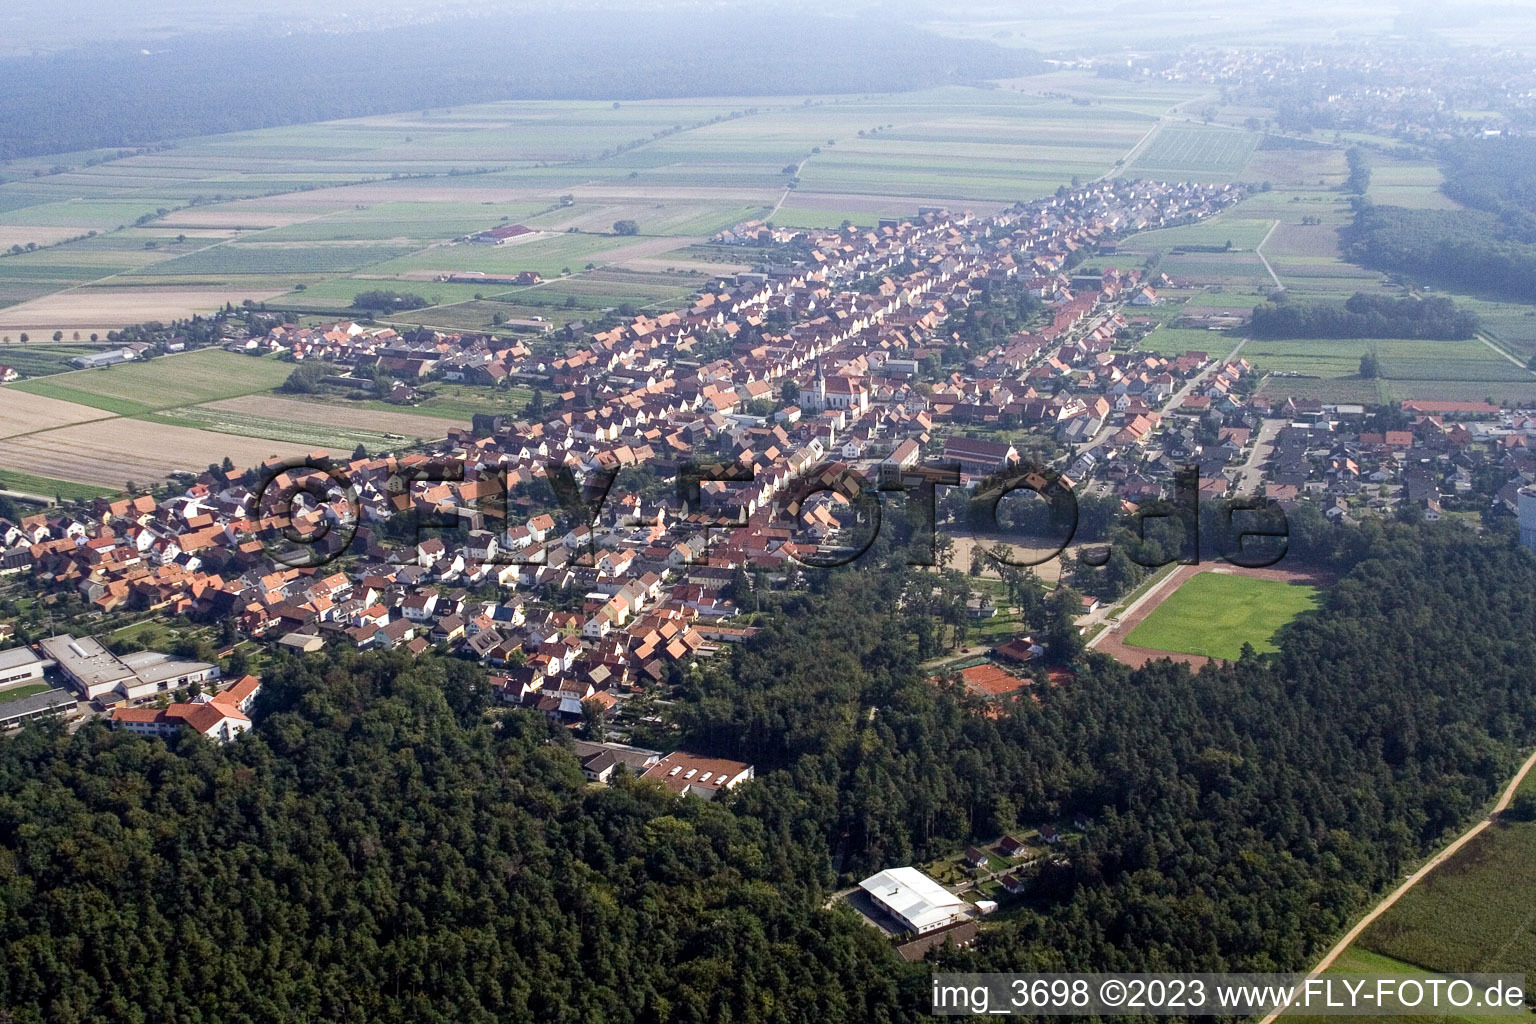 Hatzenbühl in the state Rhineland-Palatinate, Germany out of the air